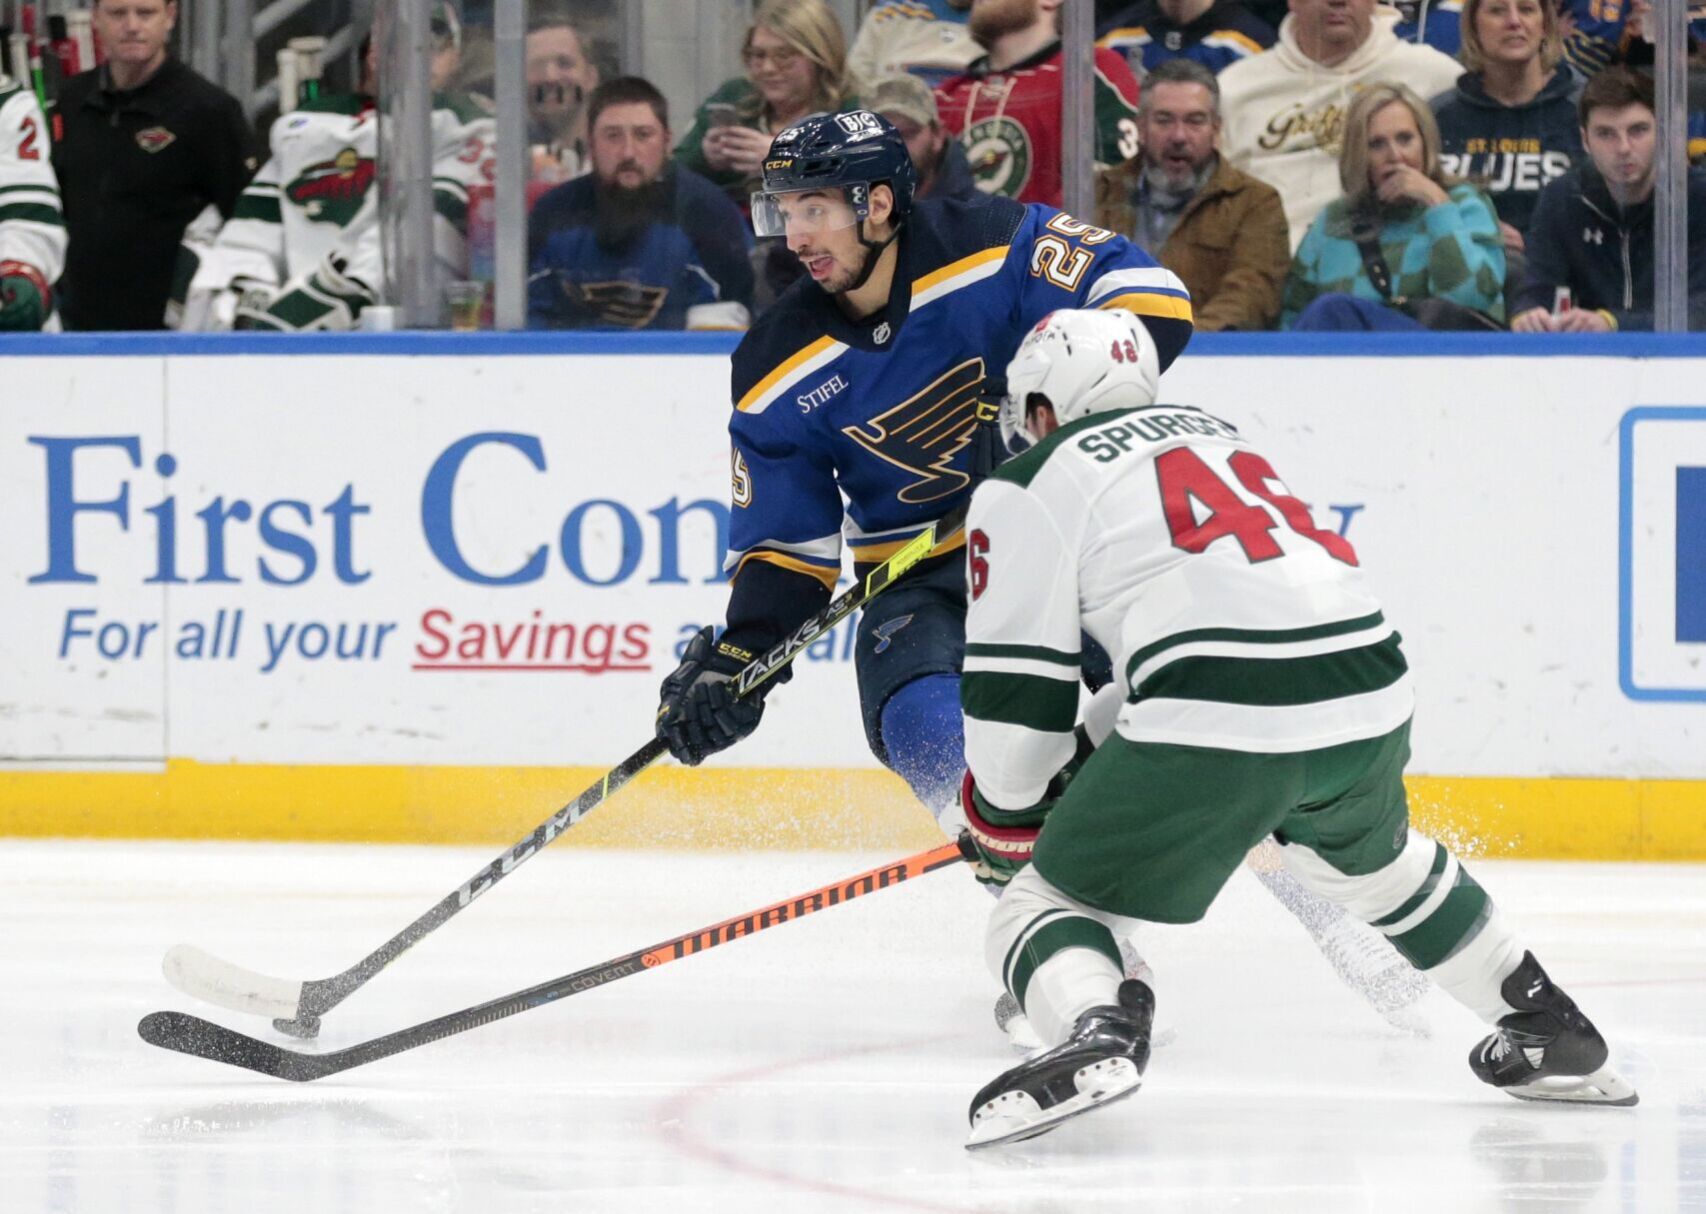 On Wrestling Night, a free-for-all breaks out between Blues and Wild